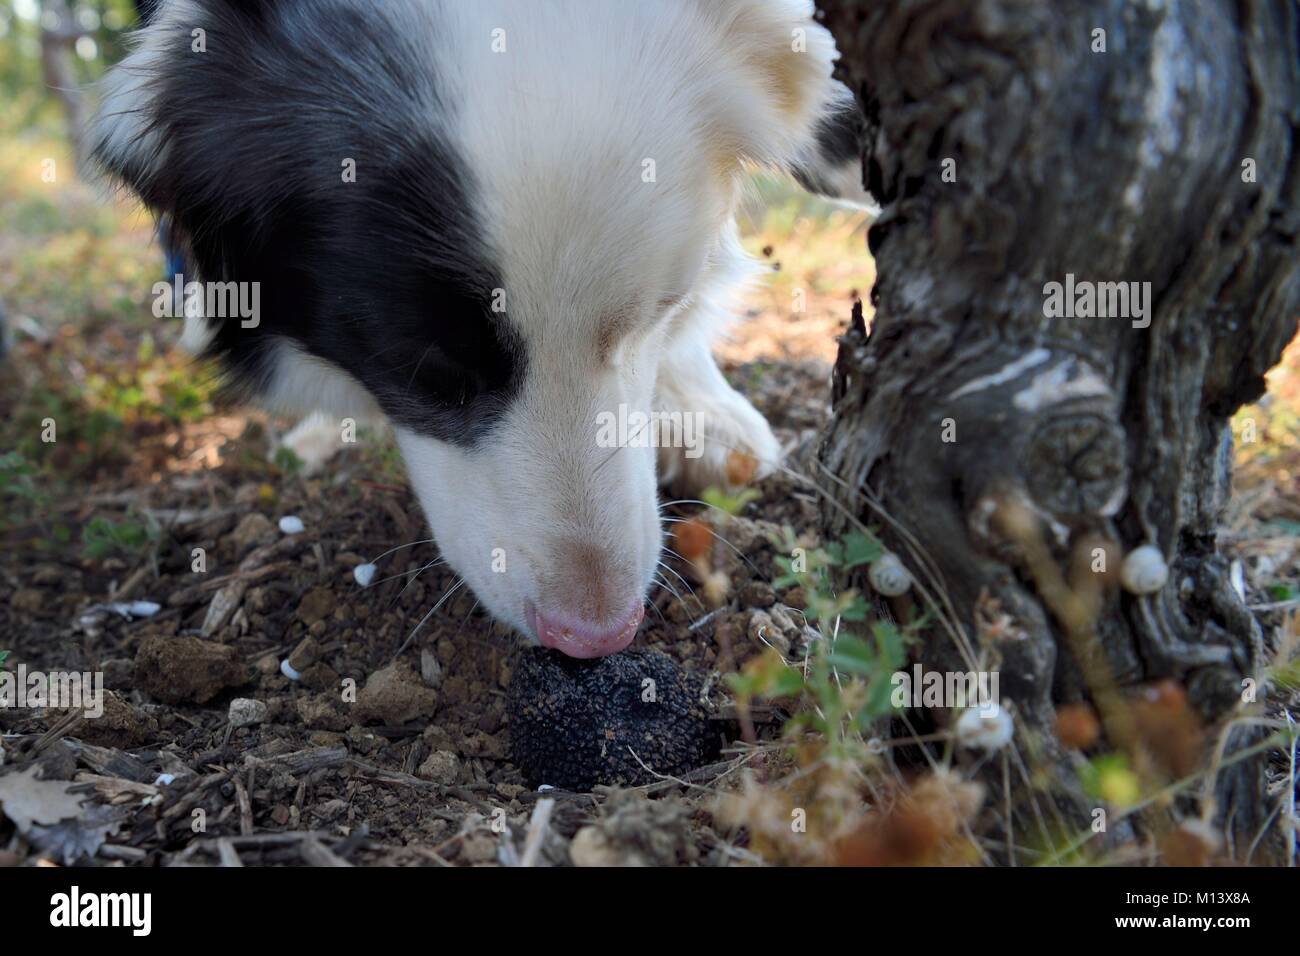 France, Var, Provence Verte (Green Provence), Bras, estate of the guest house Le Peyrourier, the truffle seeker dog Fanny detects a truffle Stock Photo